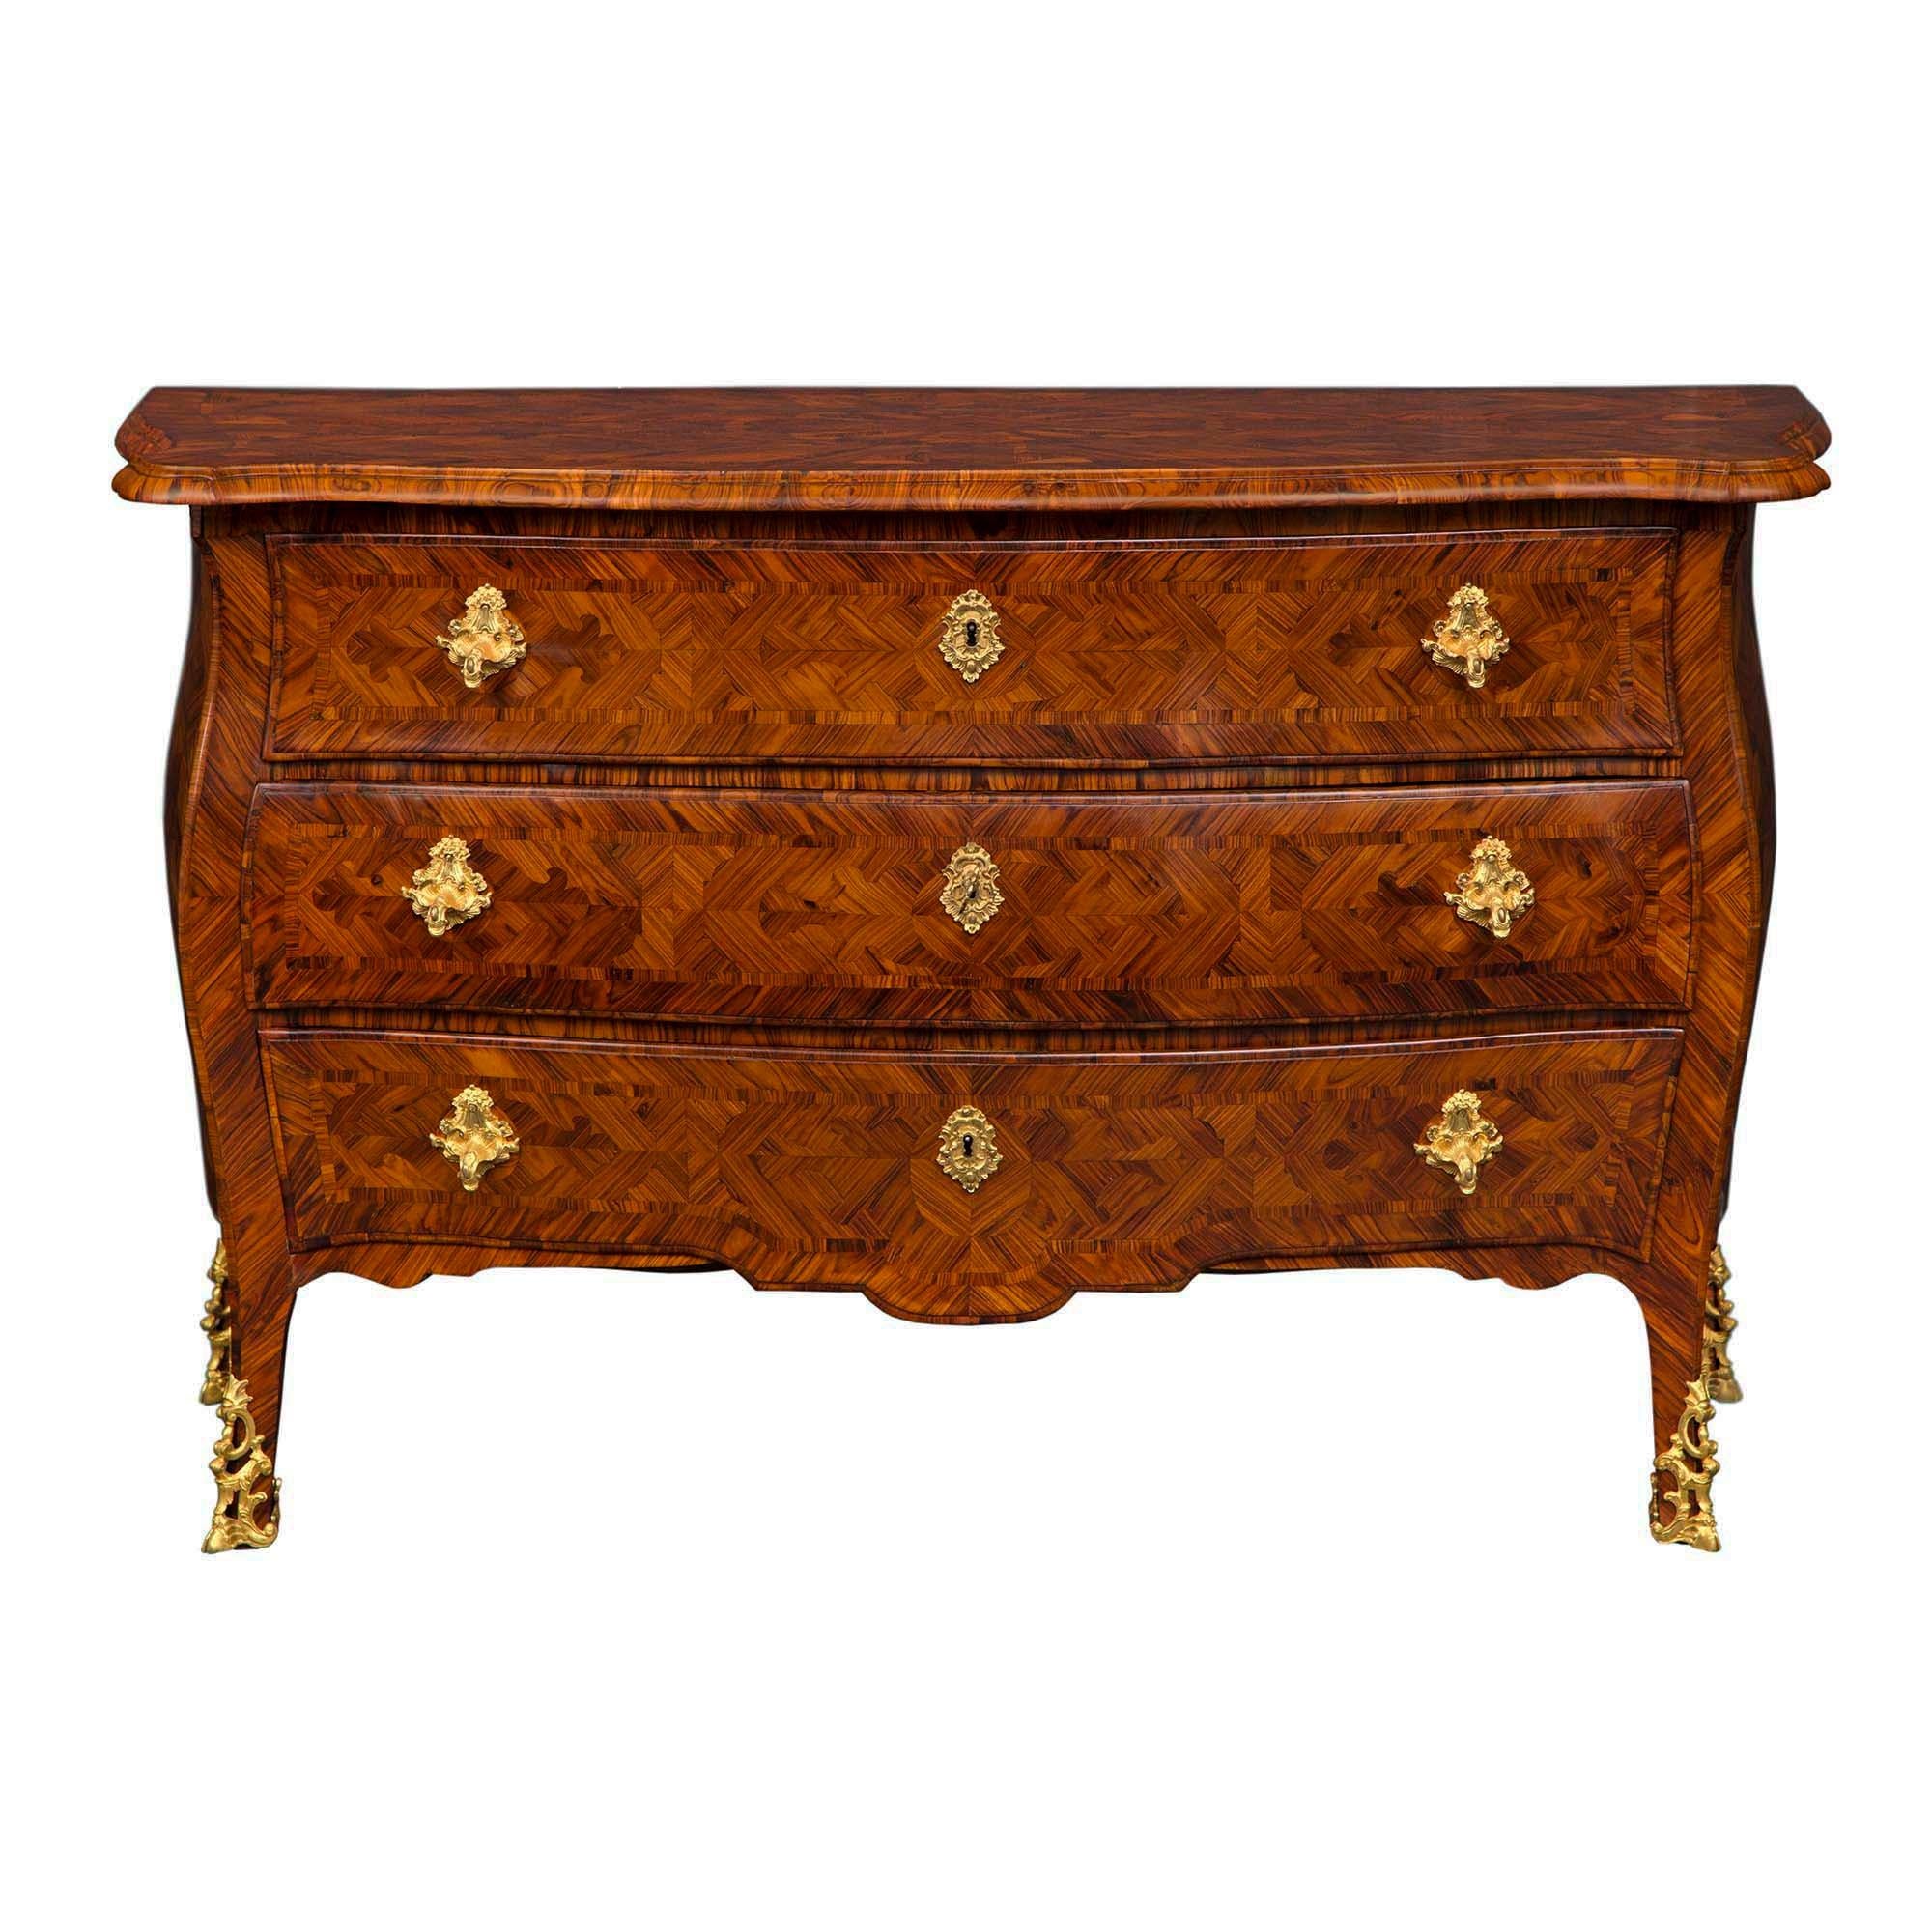 A sensational and extremely high-quality pair of Italian 19th century Louis XV period, rosewood and ormolu three drawer chests. The chests are raised on cabriole legs with ormolu sabots. The three drawers have a scrolled bottom frieze and are